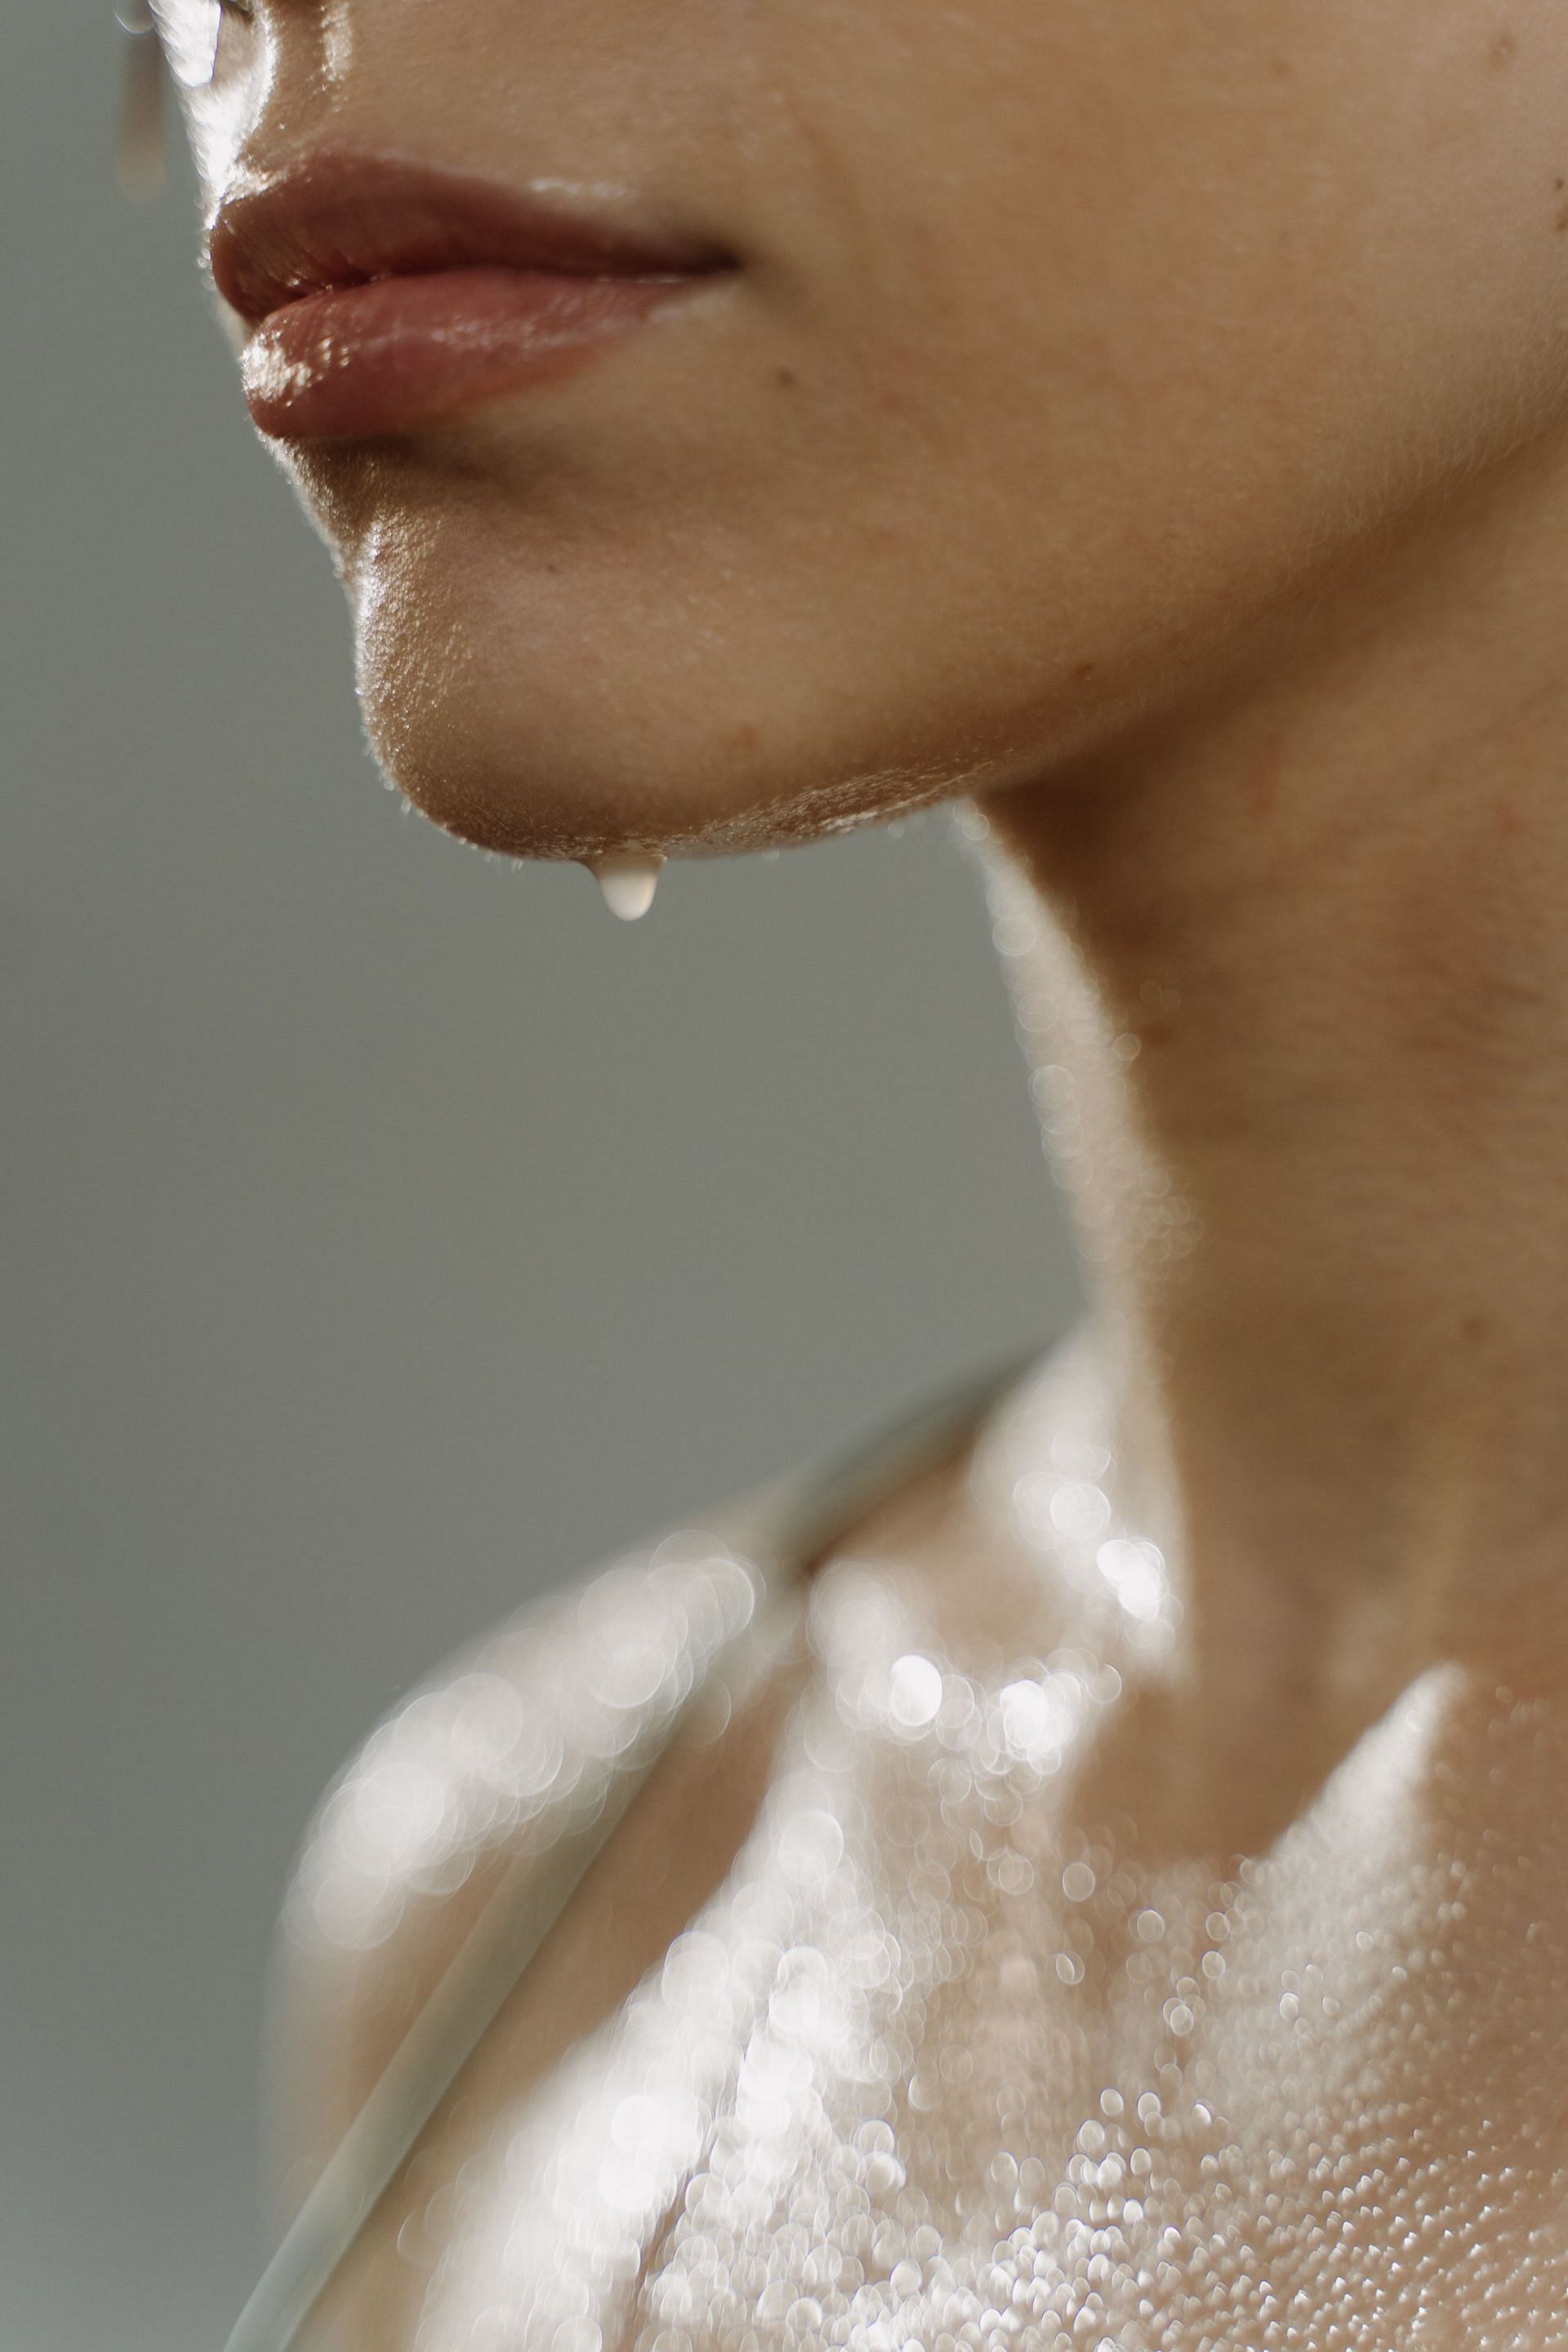 Not showering after exercise should be avoided.. (Image via Pexels)